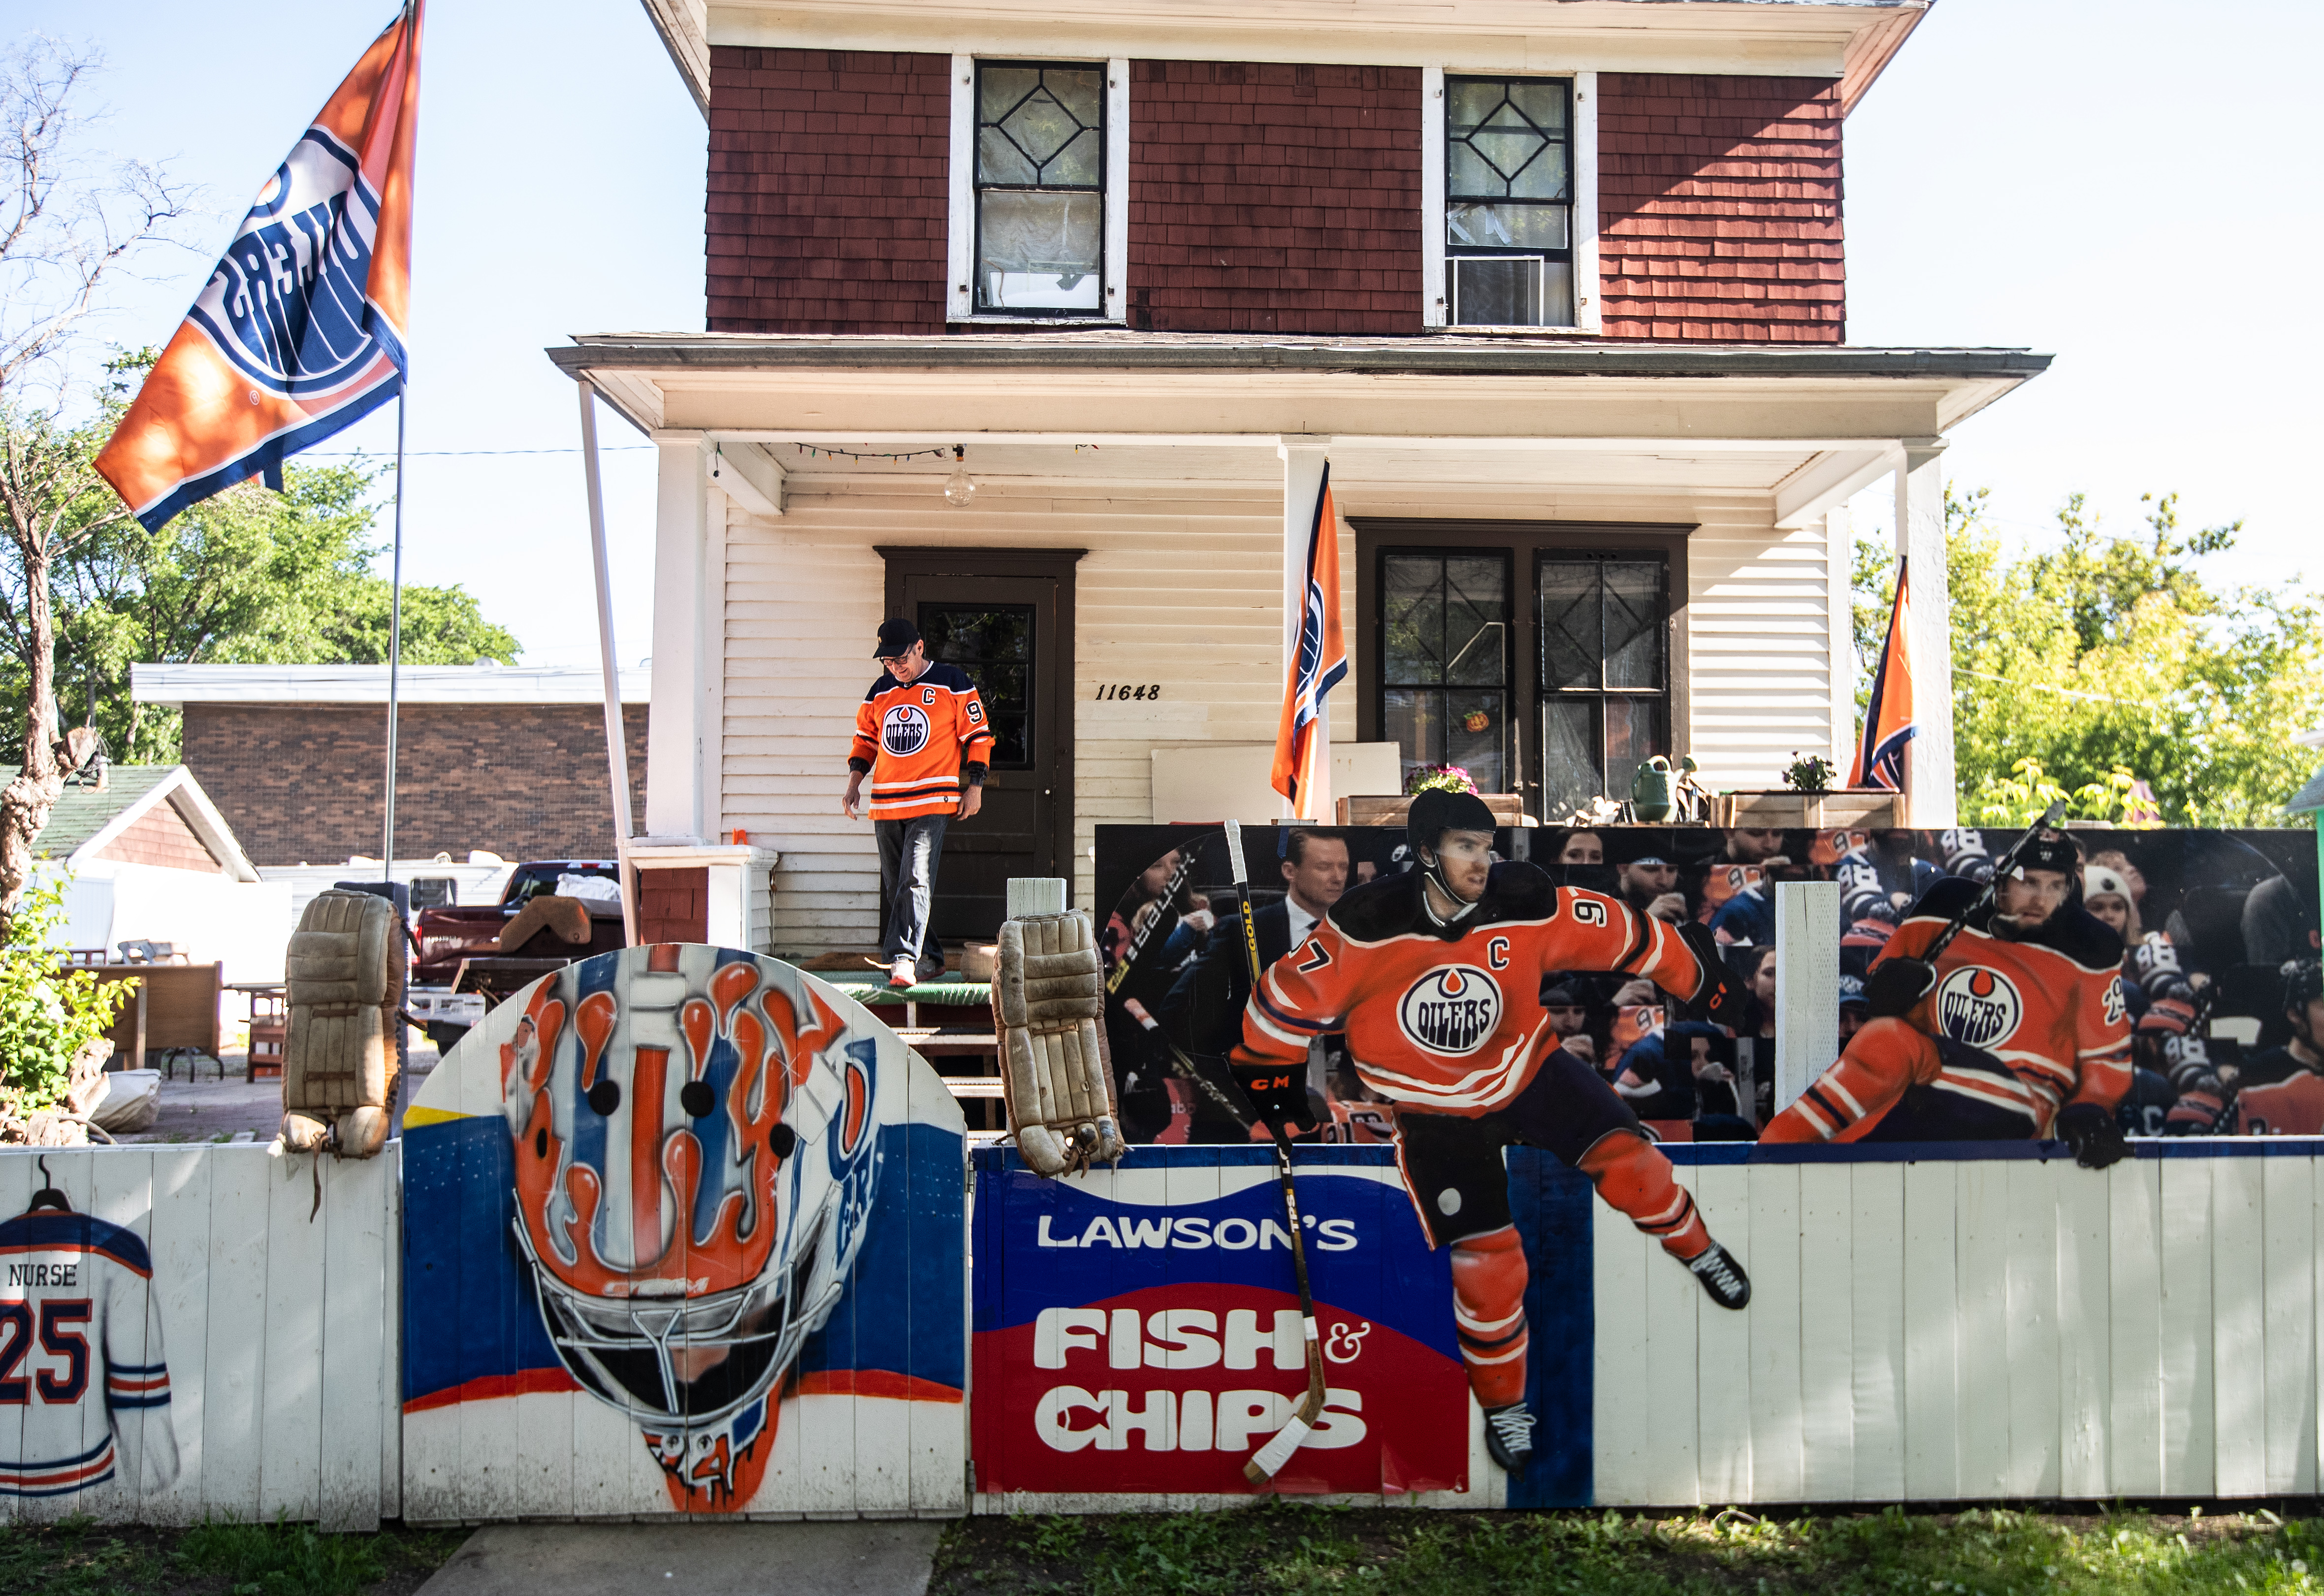 Diehard Edmonton Oilers fan decorates fence with life-sized player paintings